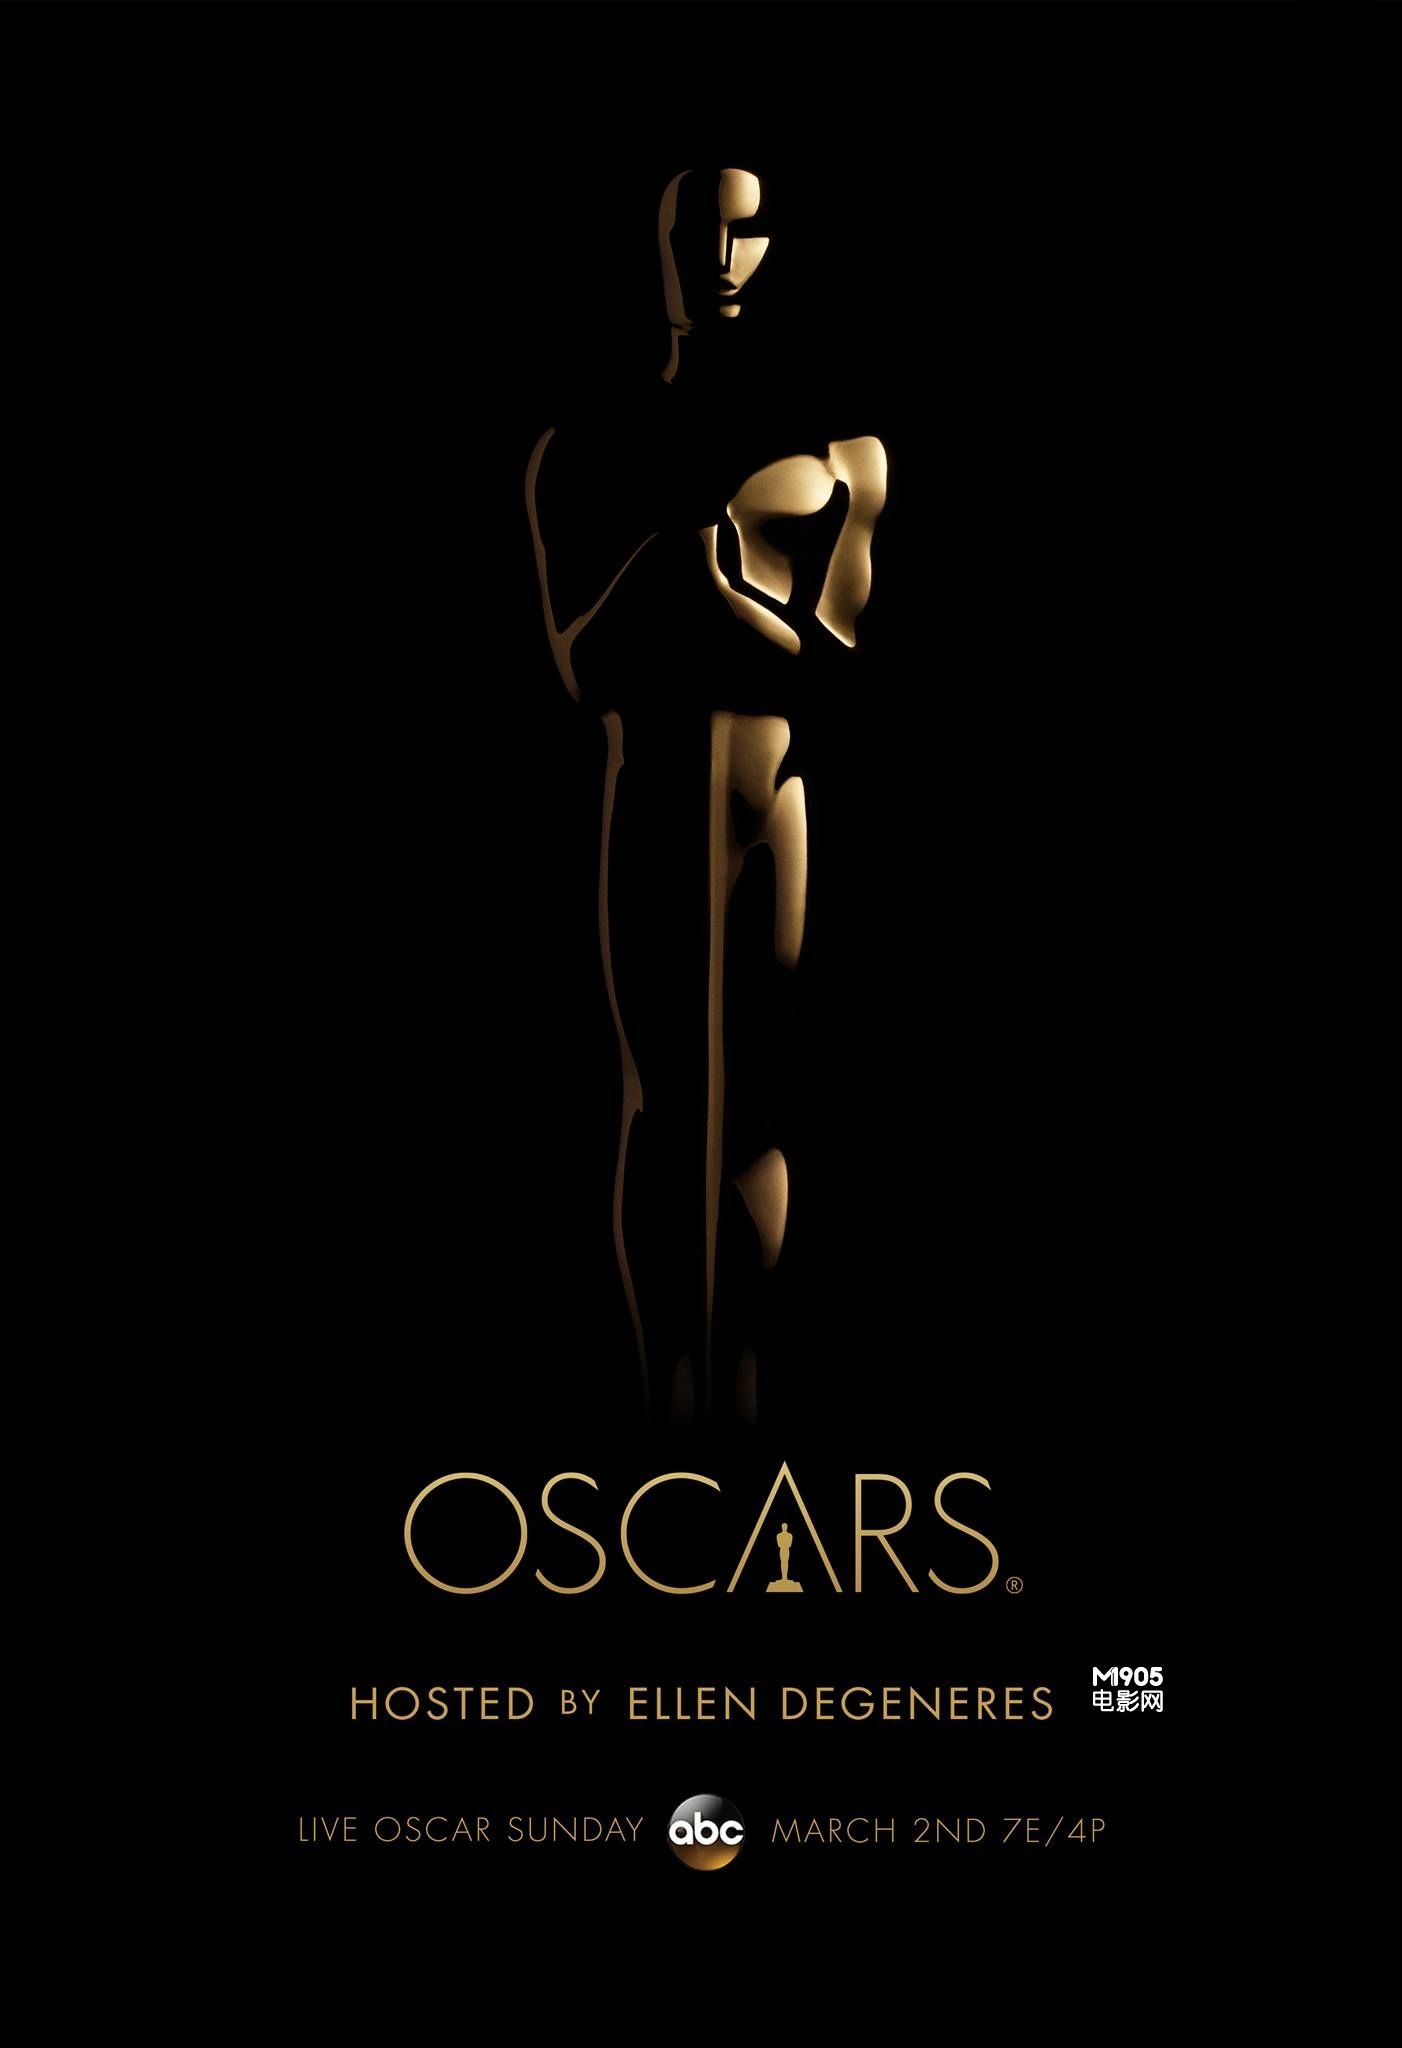 New Oscar Posters Revealed | The Edge of the Frame